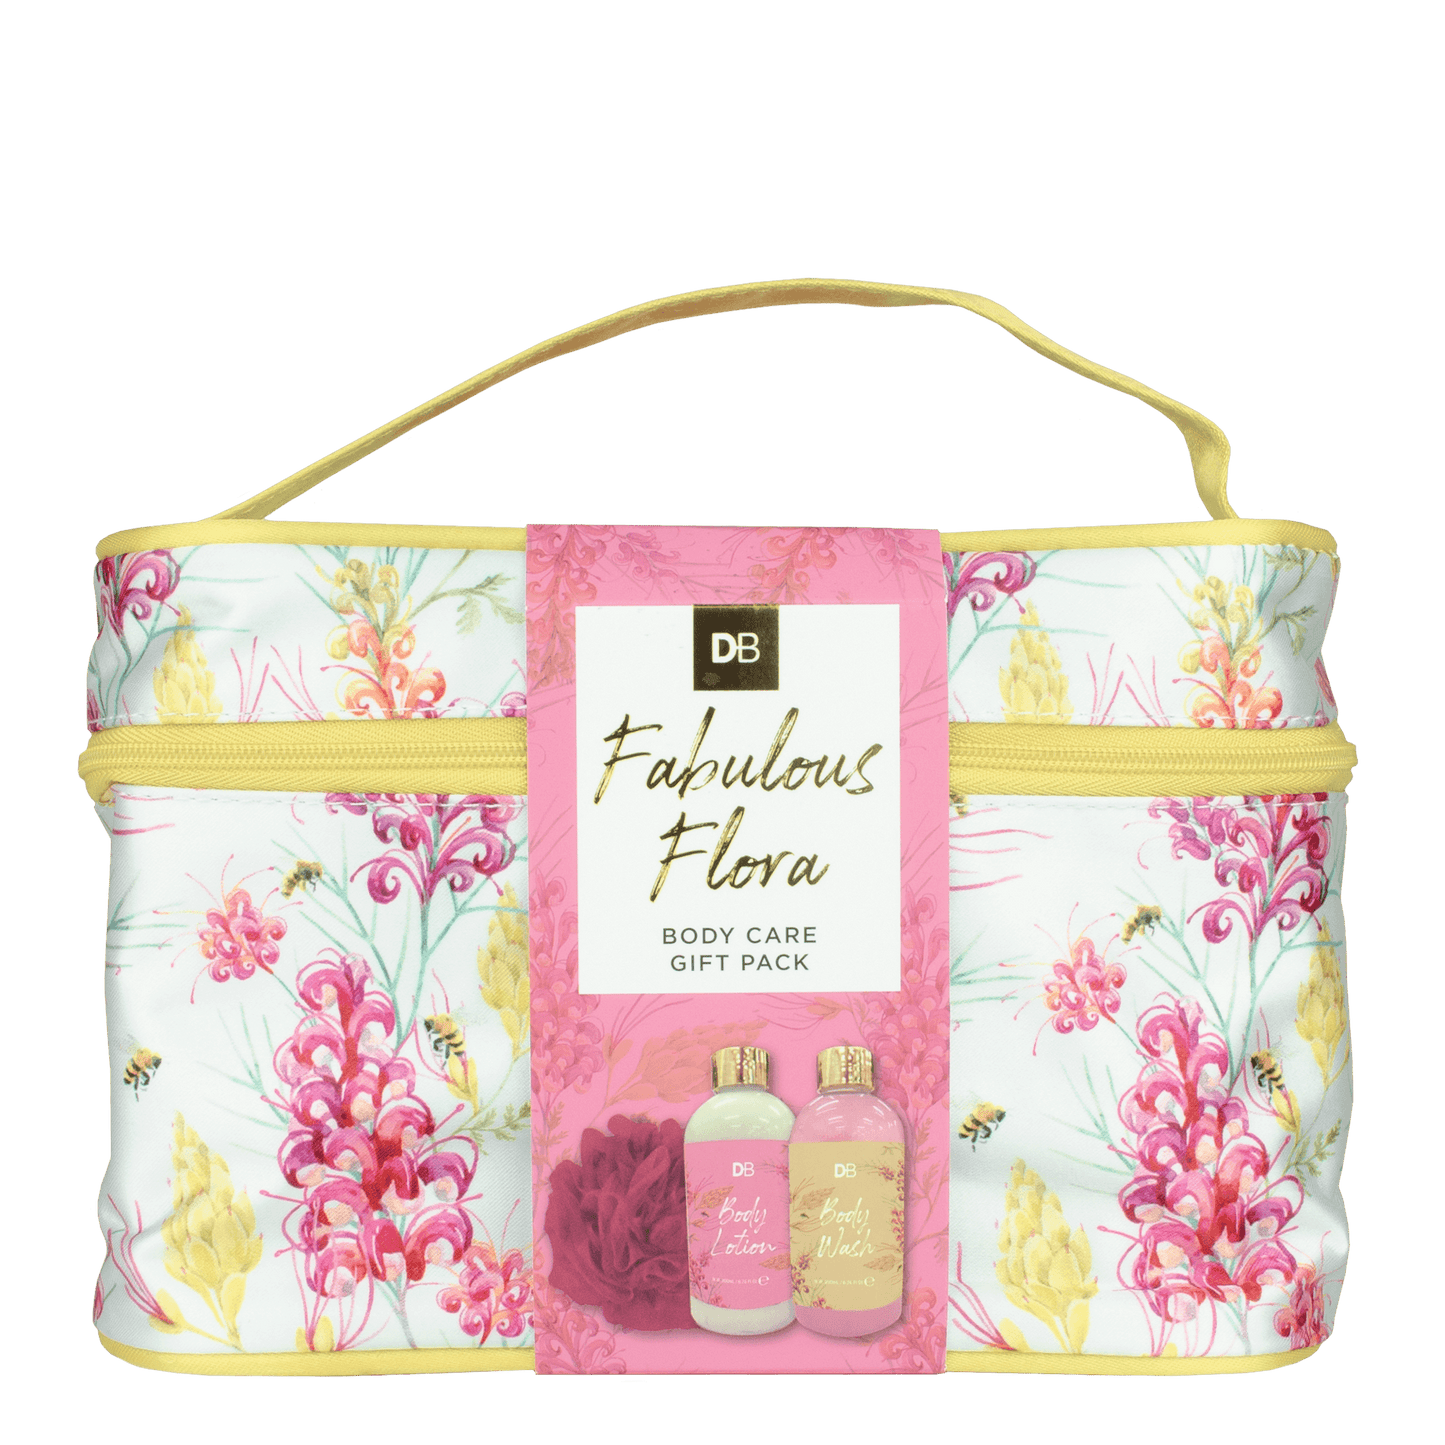 Fabulous Flora Body Care Gift Pack | DB Cosmetics | 01